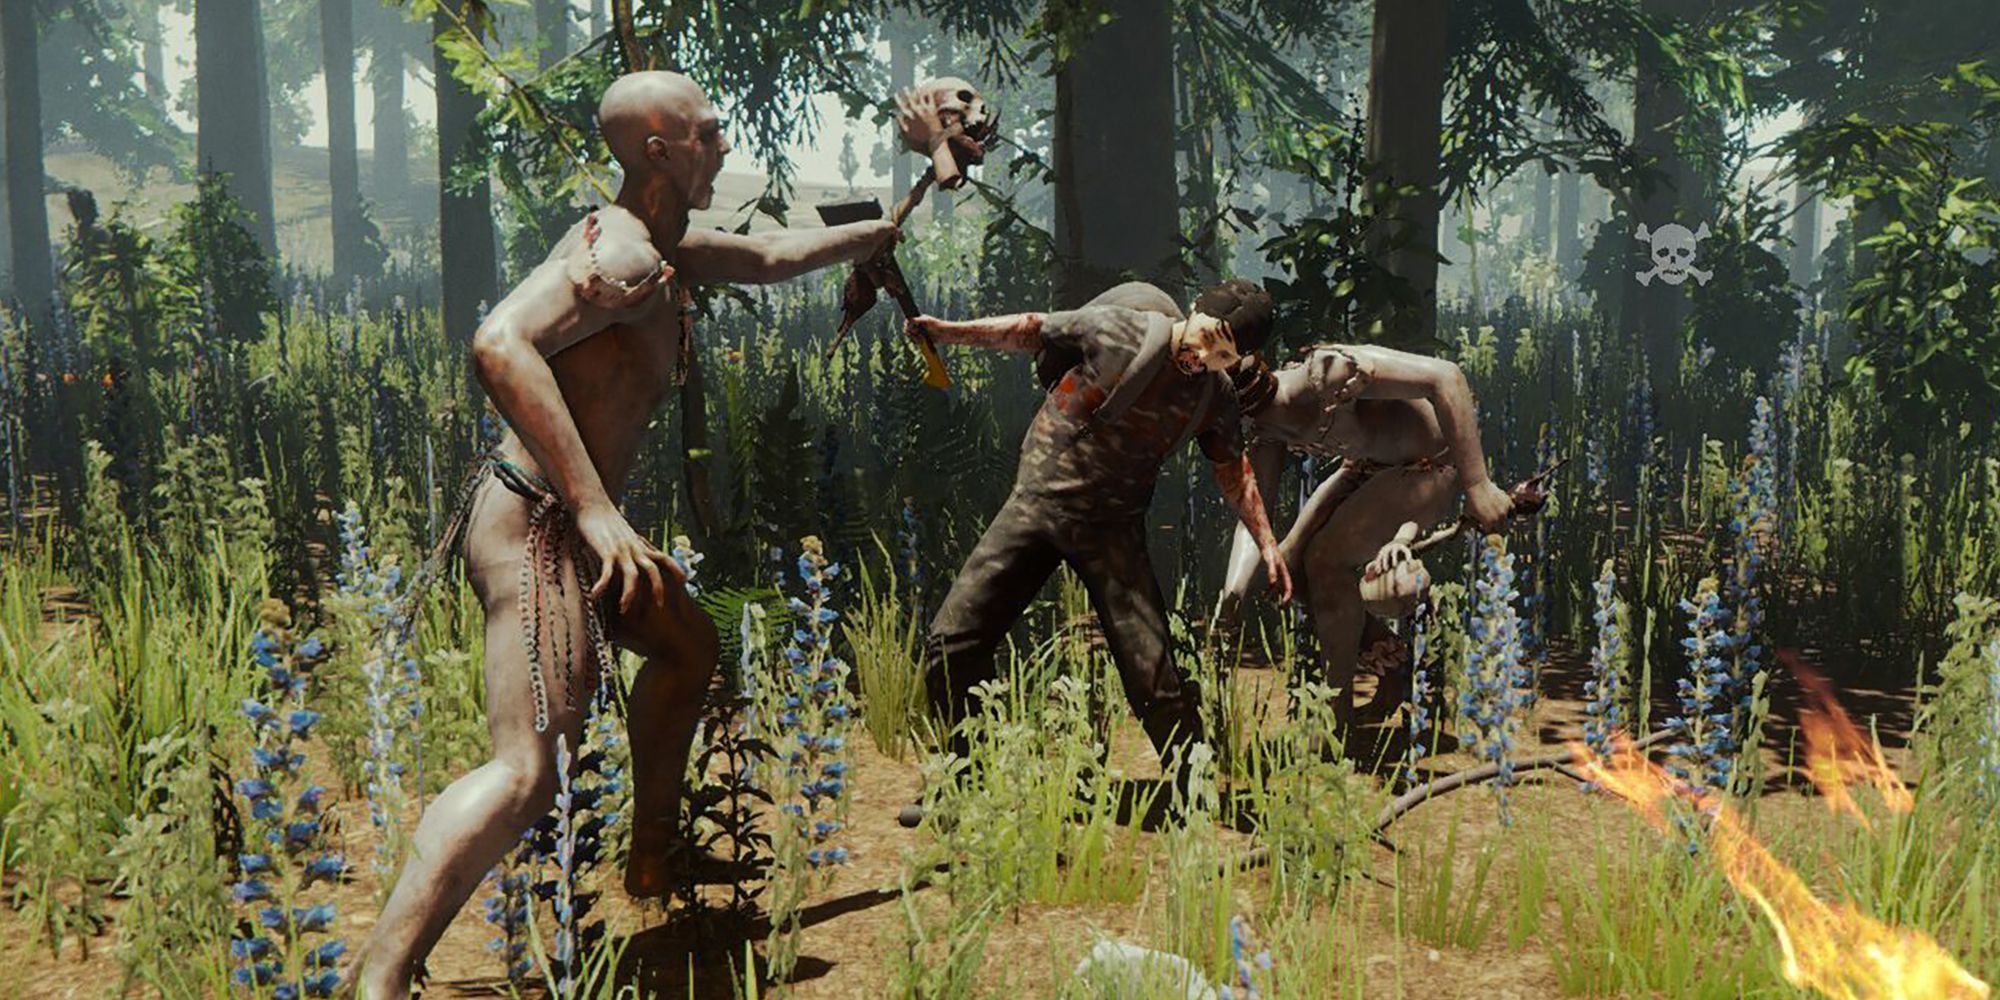 Cannibal Enemies In The Forest